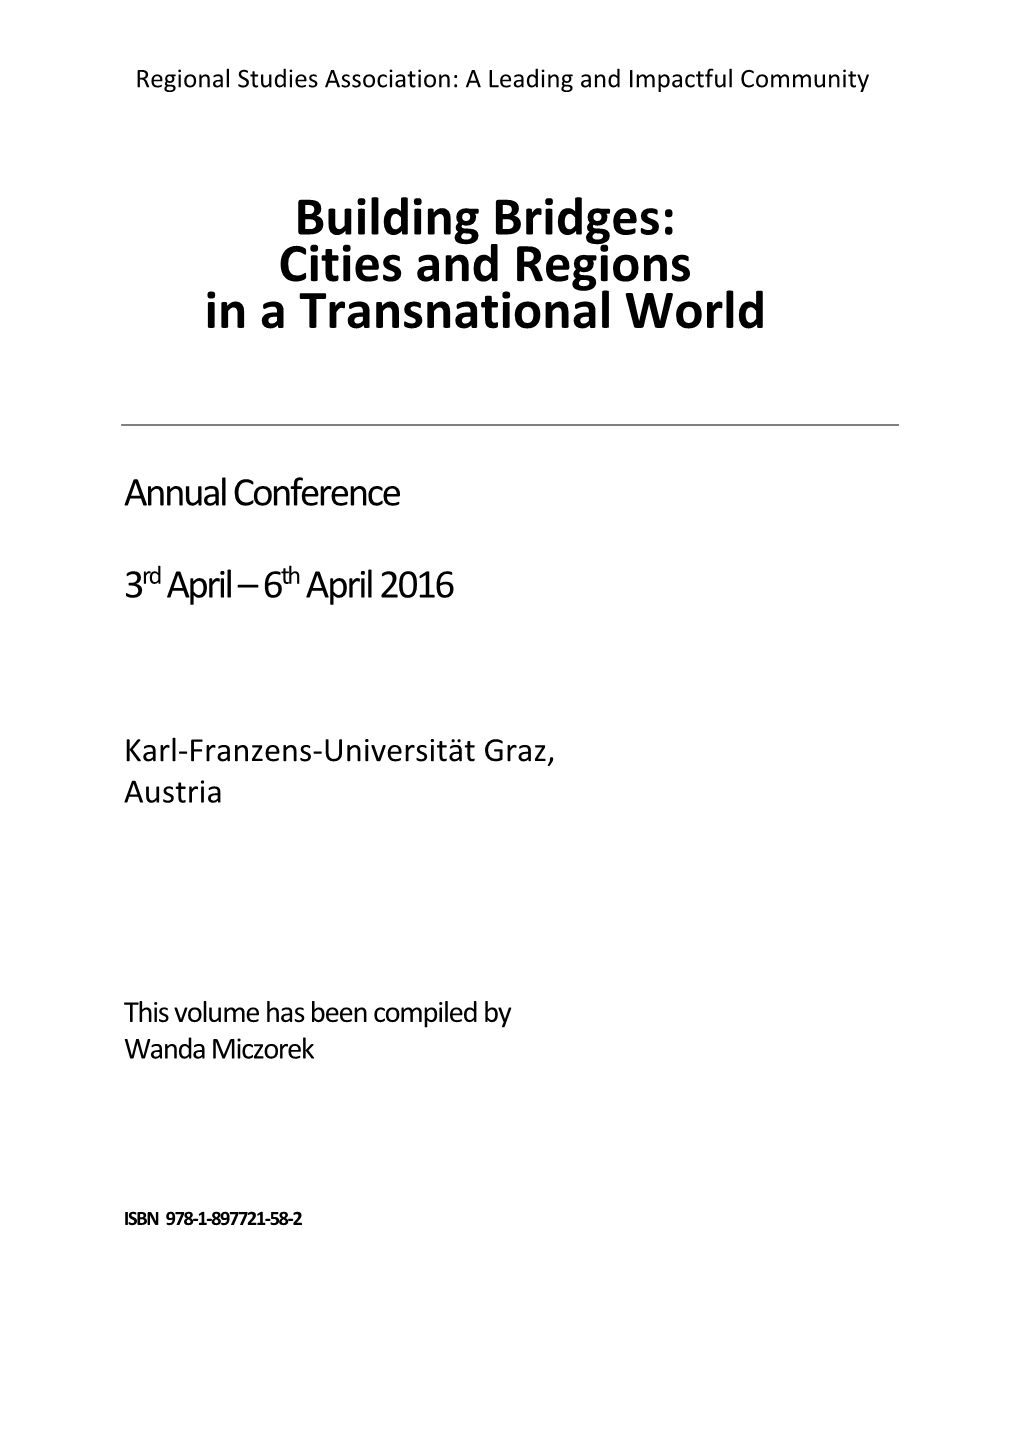 Building Bridges: Cities and Regions in a Transnational World